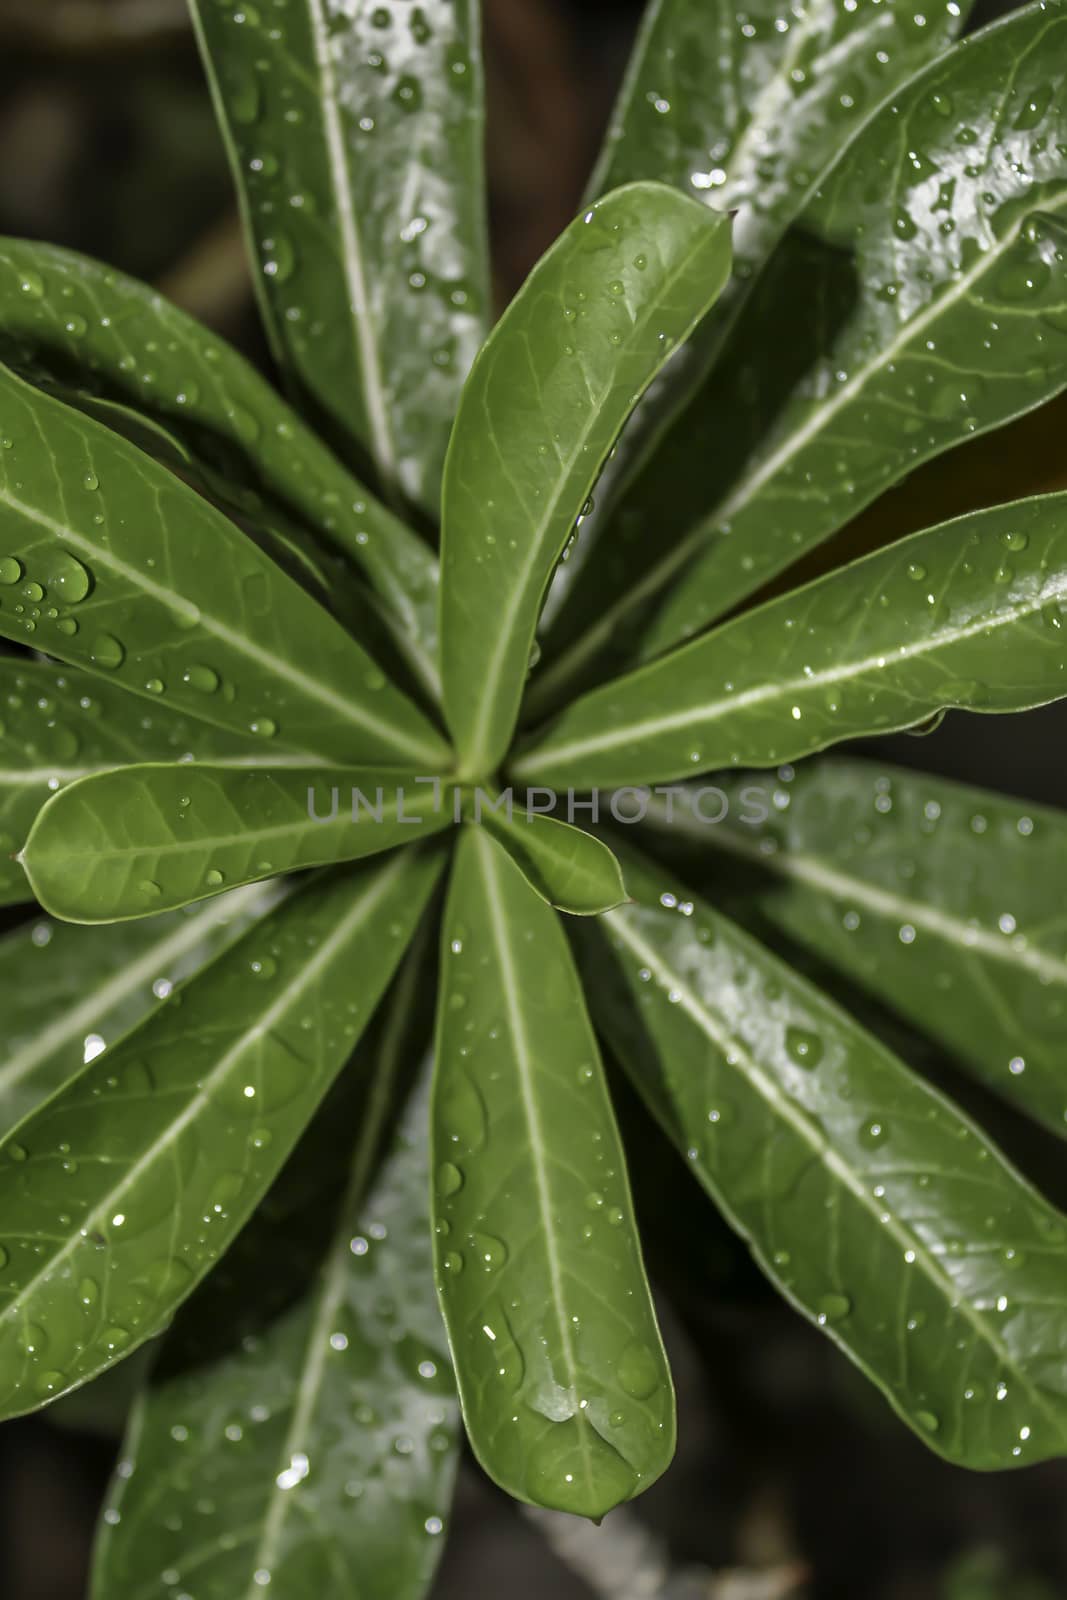 Plant Leaf with water drops. Wet leaves after rain. The dew on the leaves. Beautiful natural background.